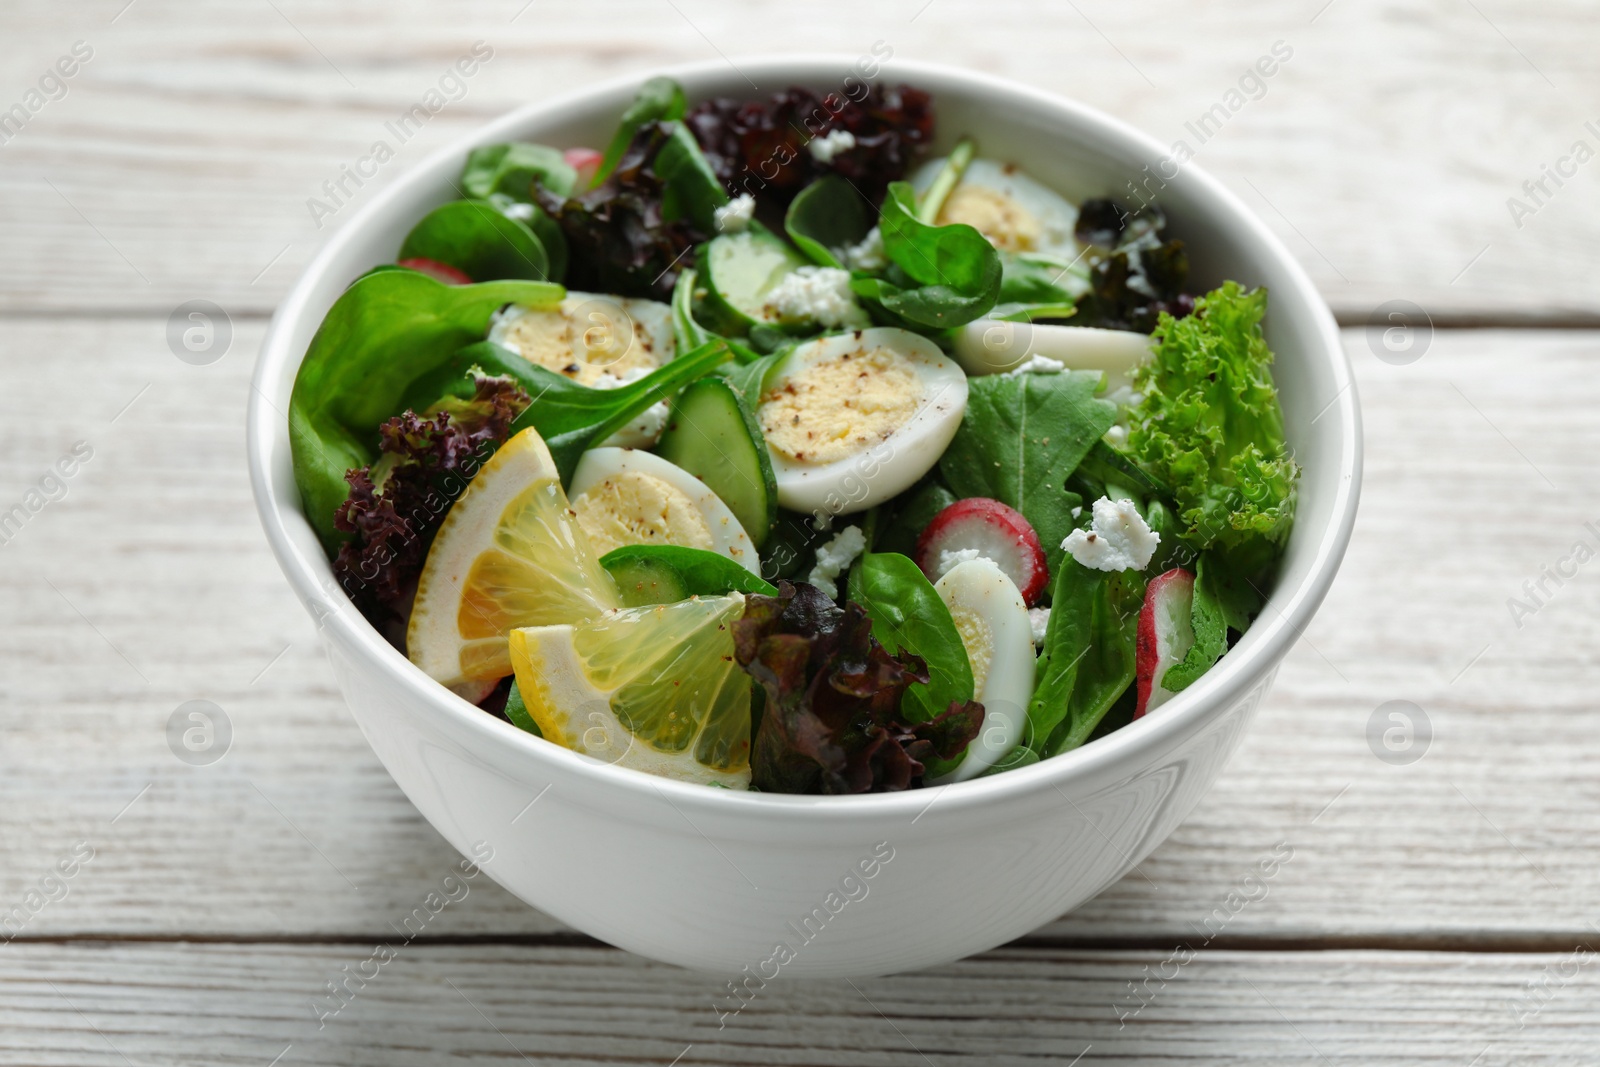 Photo of Delicious salad with boiled eggs, vegetables and lemon in bowl on white wooden table, closeup